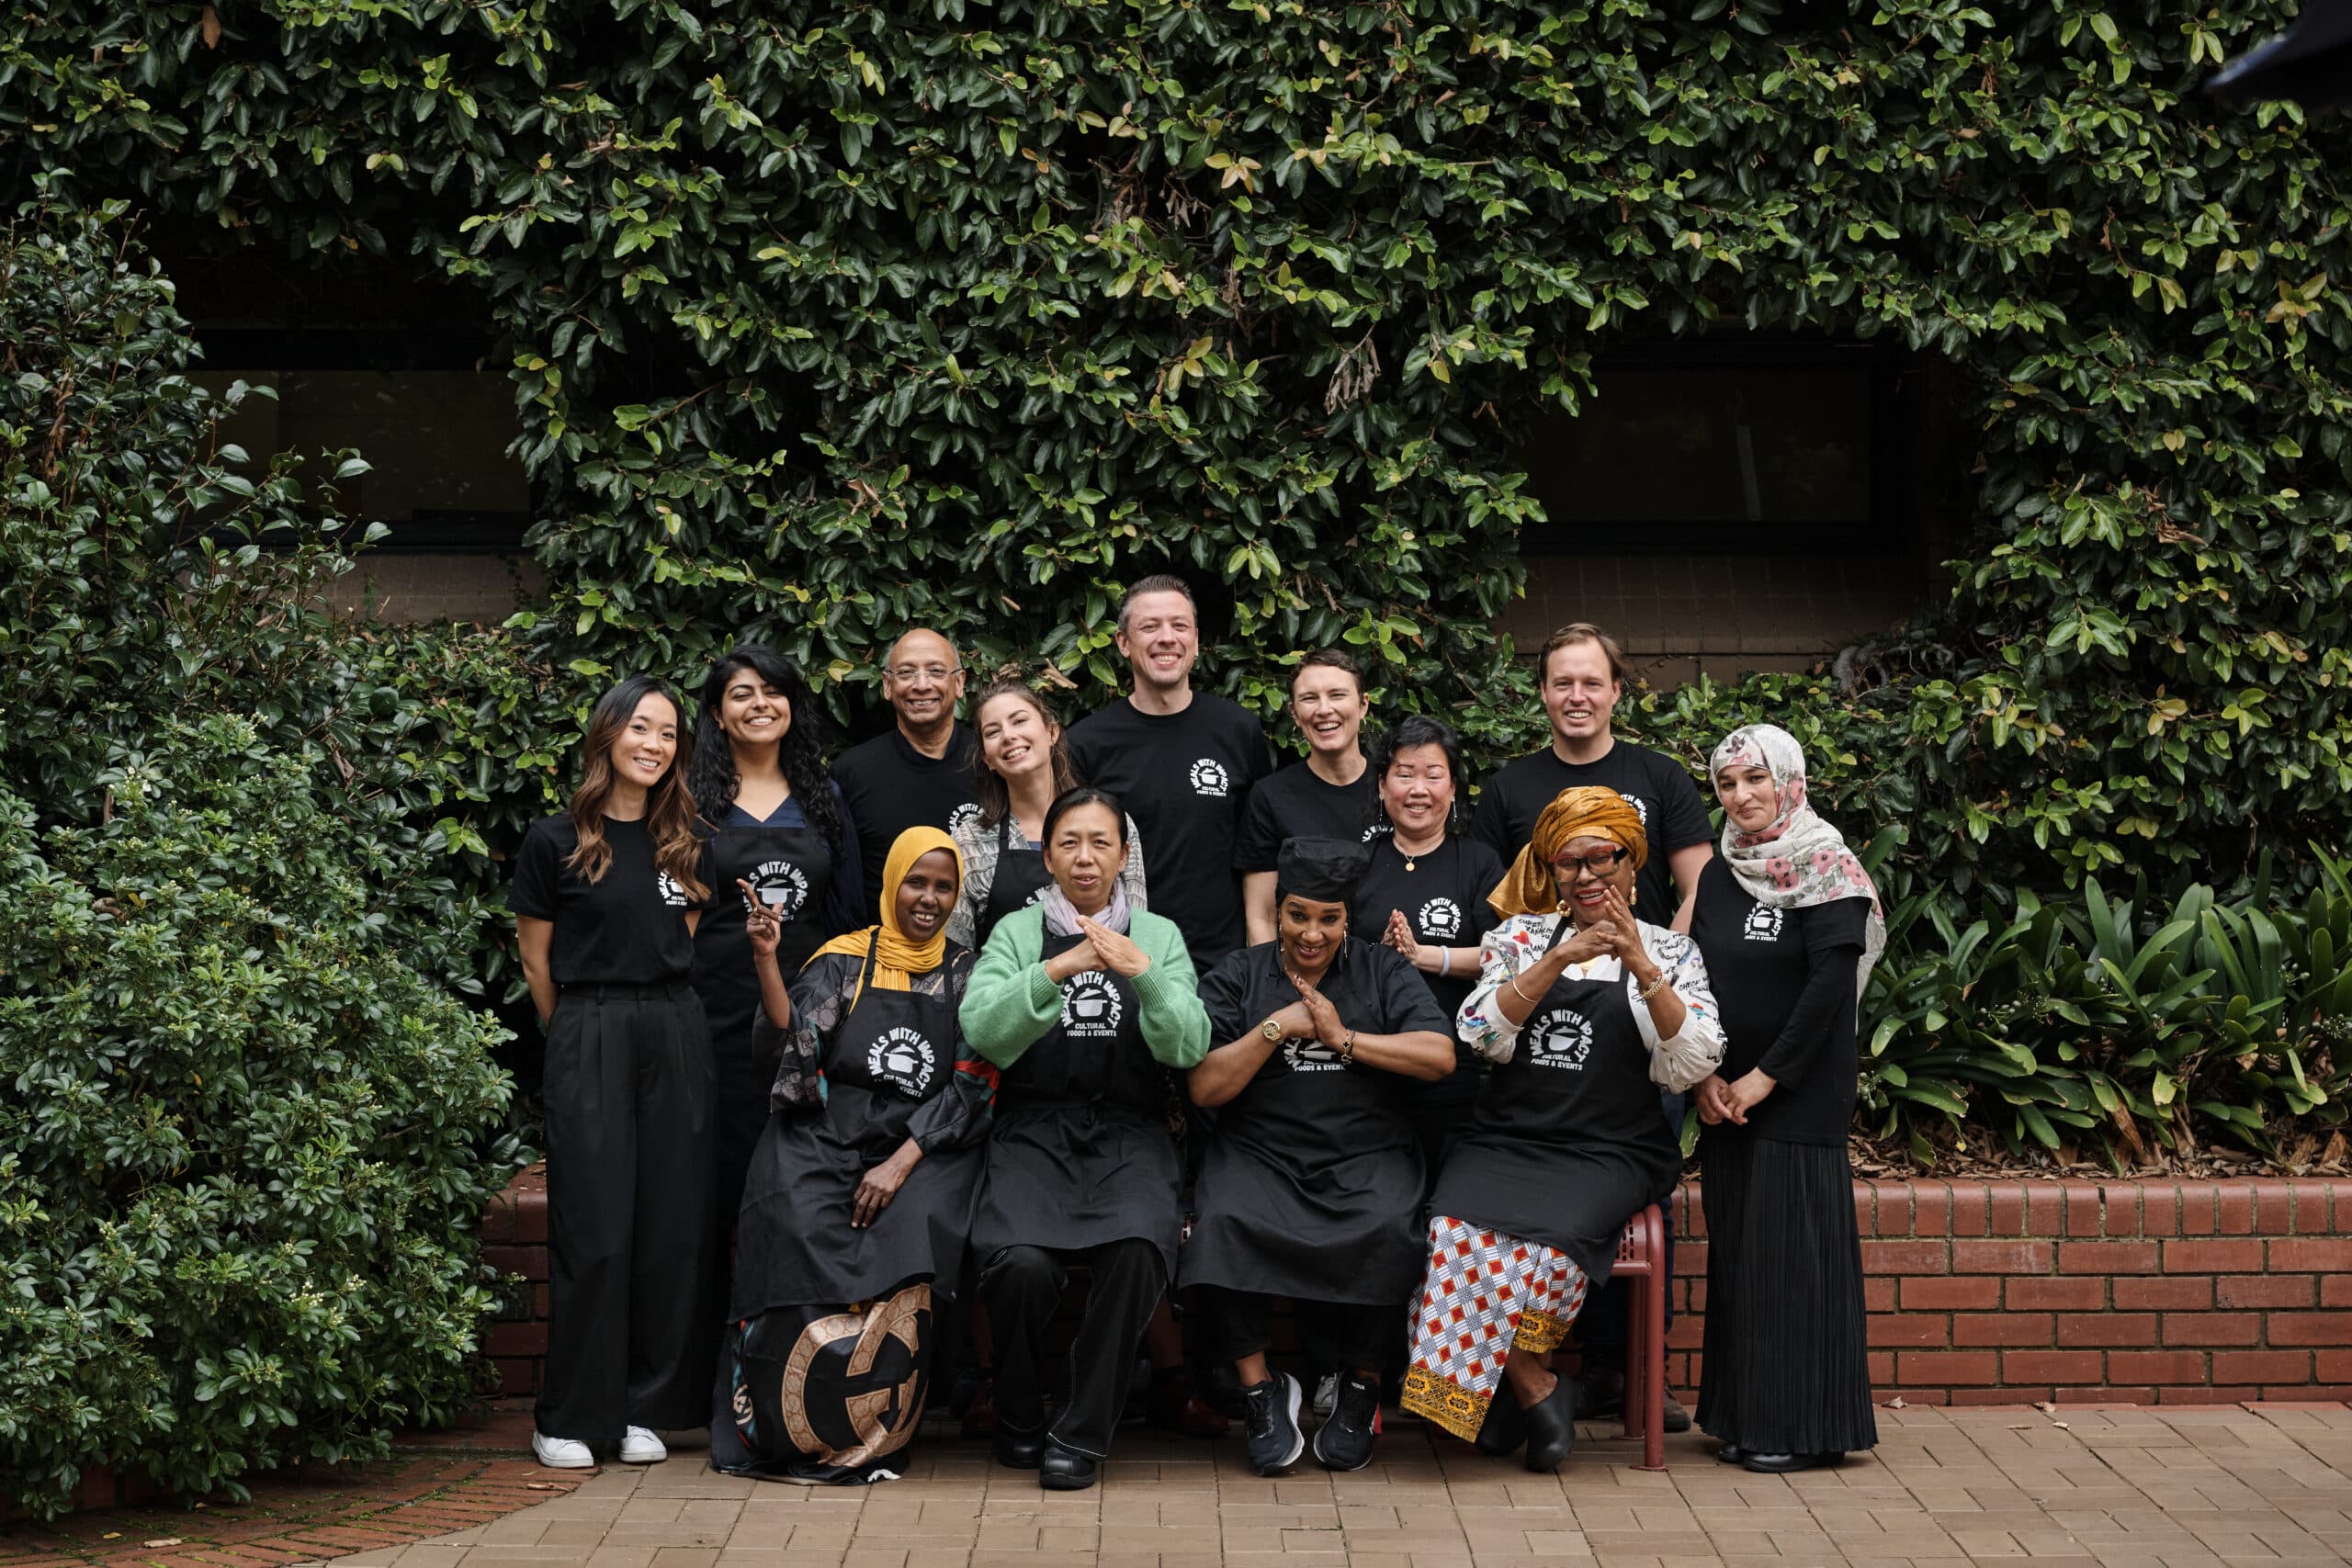 Team Group Photo - Social Enterprise Catering - Nonprofit Food Services - Meals with Impact